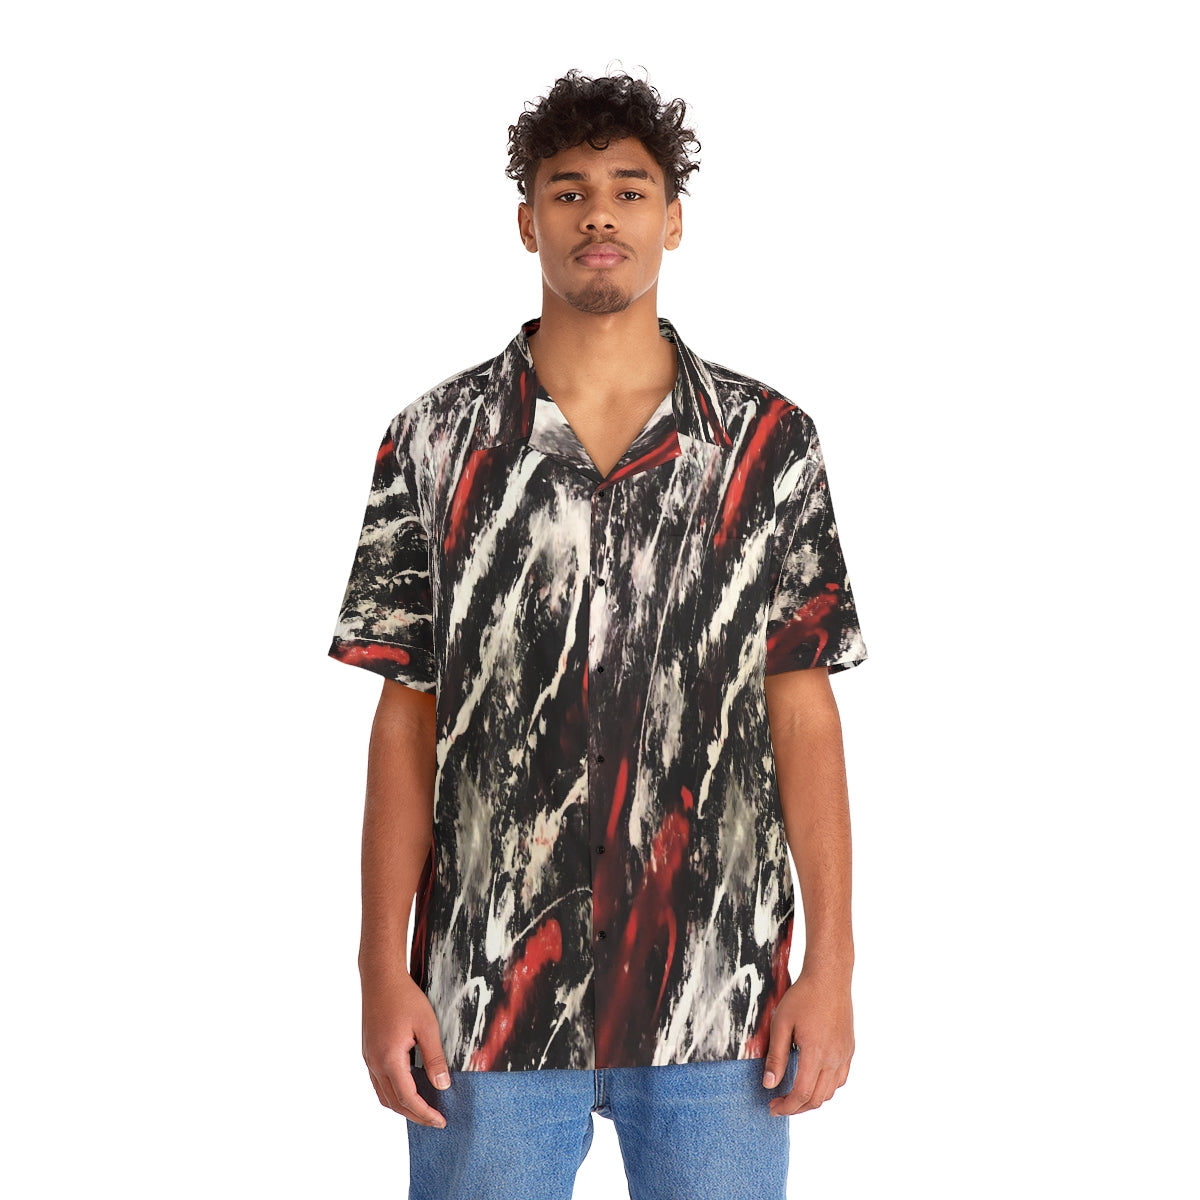 Abstract Men's Shirt - O By Onica Online Store